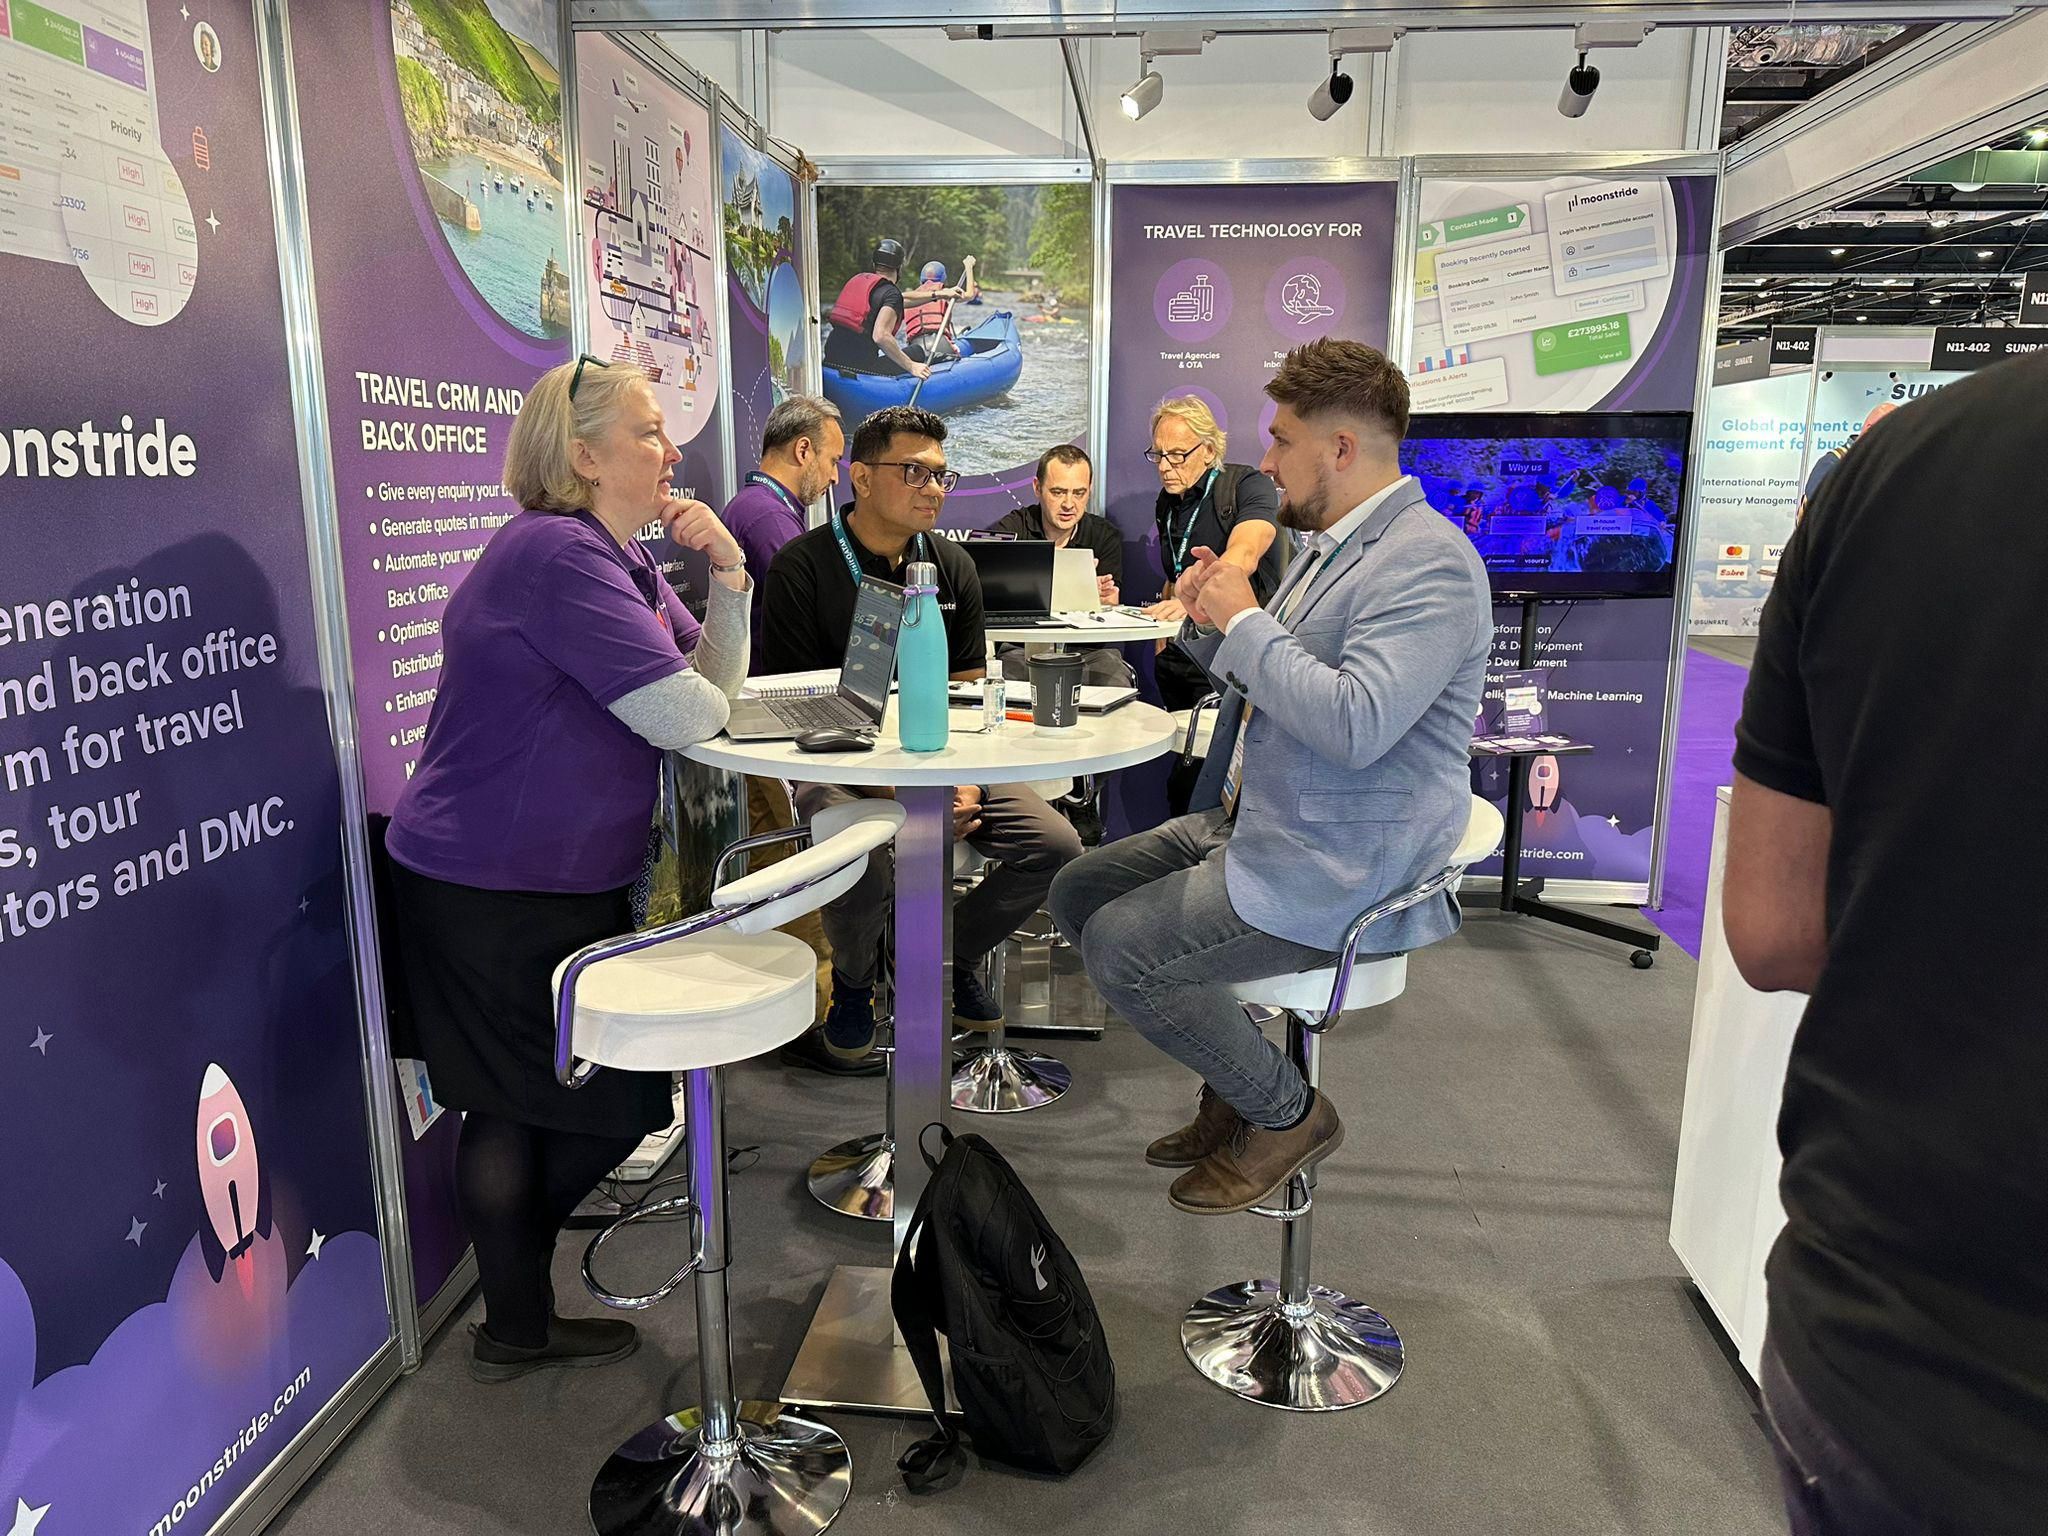 Discussing Travel Technology at WTM London